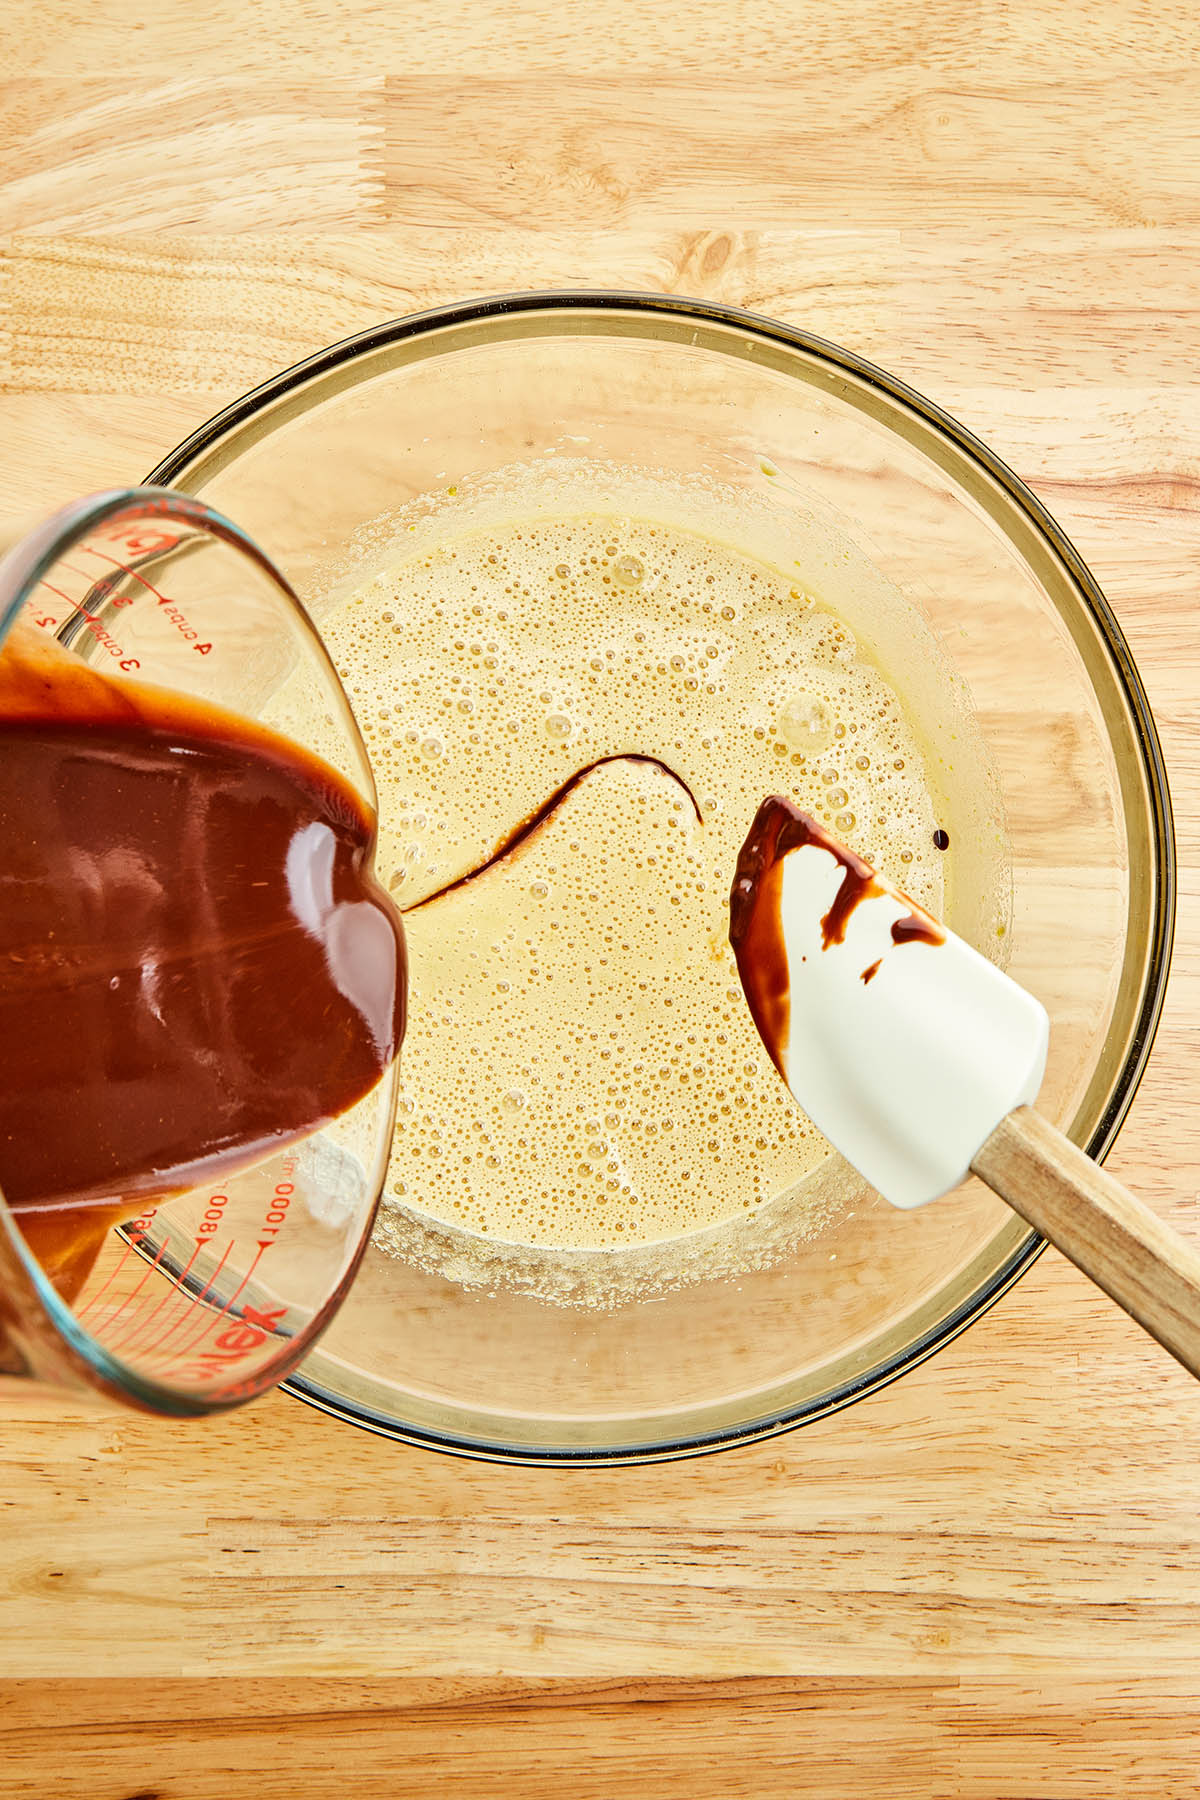 Melted chocolate being poured from a glass measuring cup into a bowl of mixed eggs and sugar.